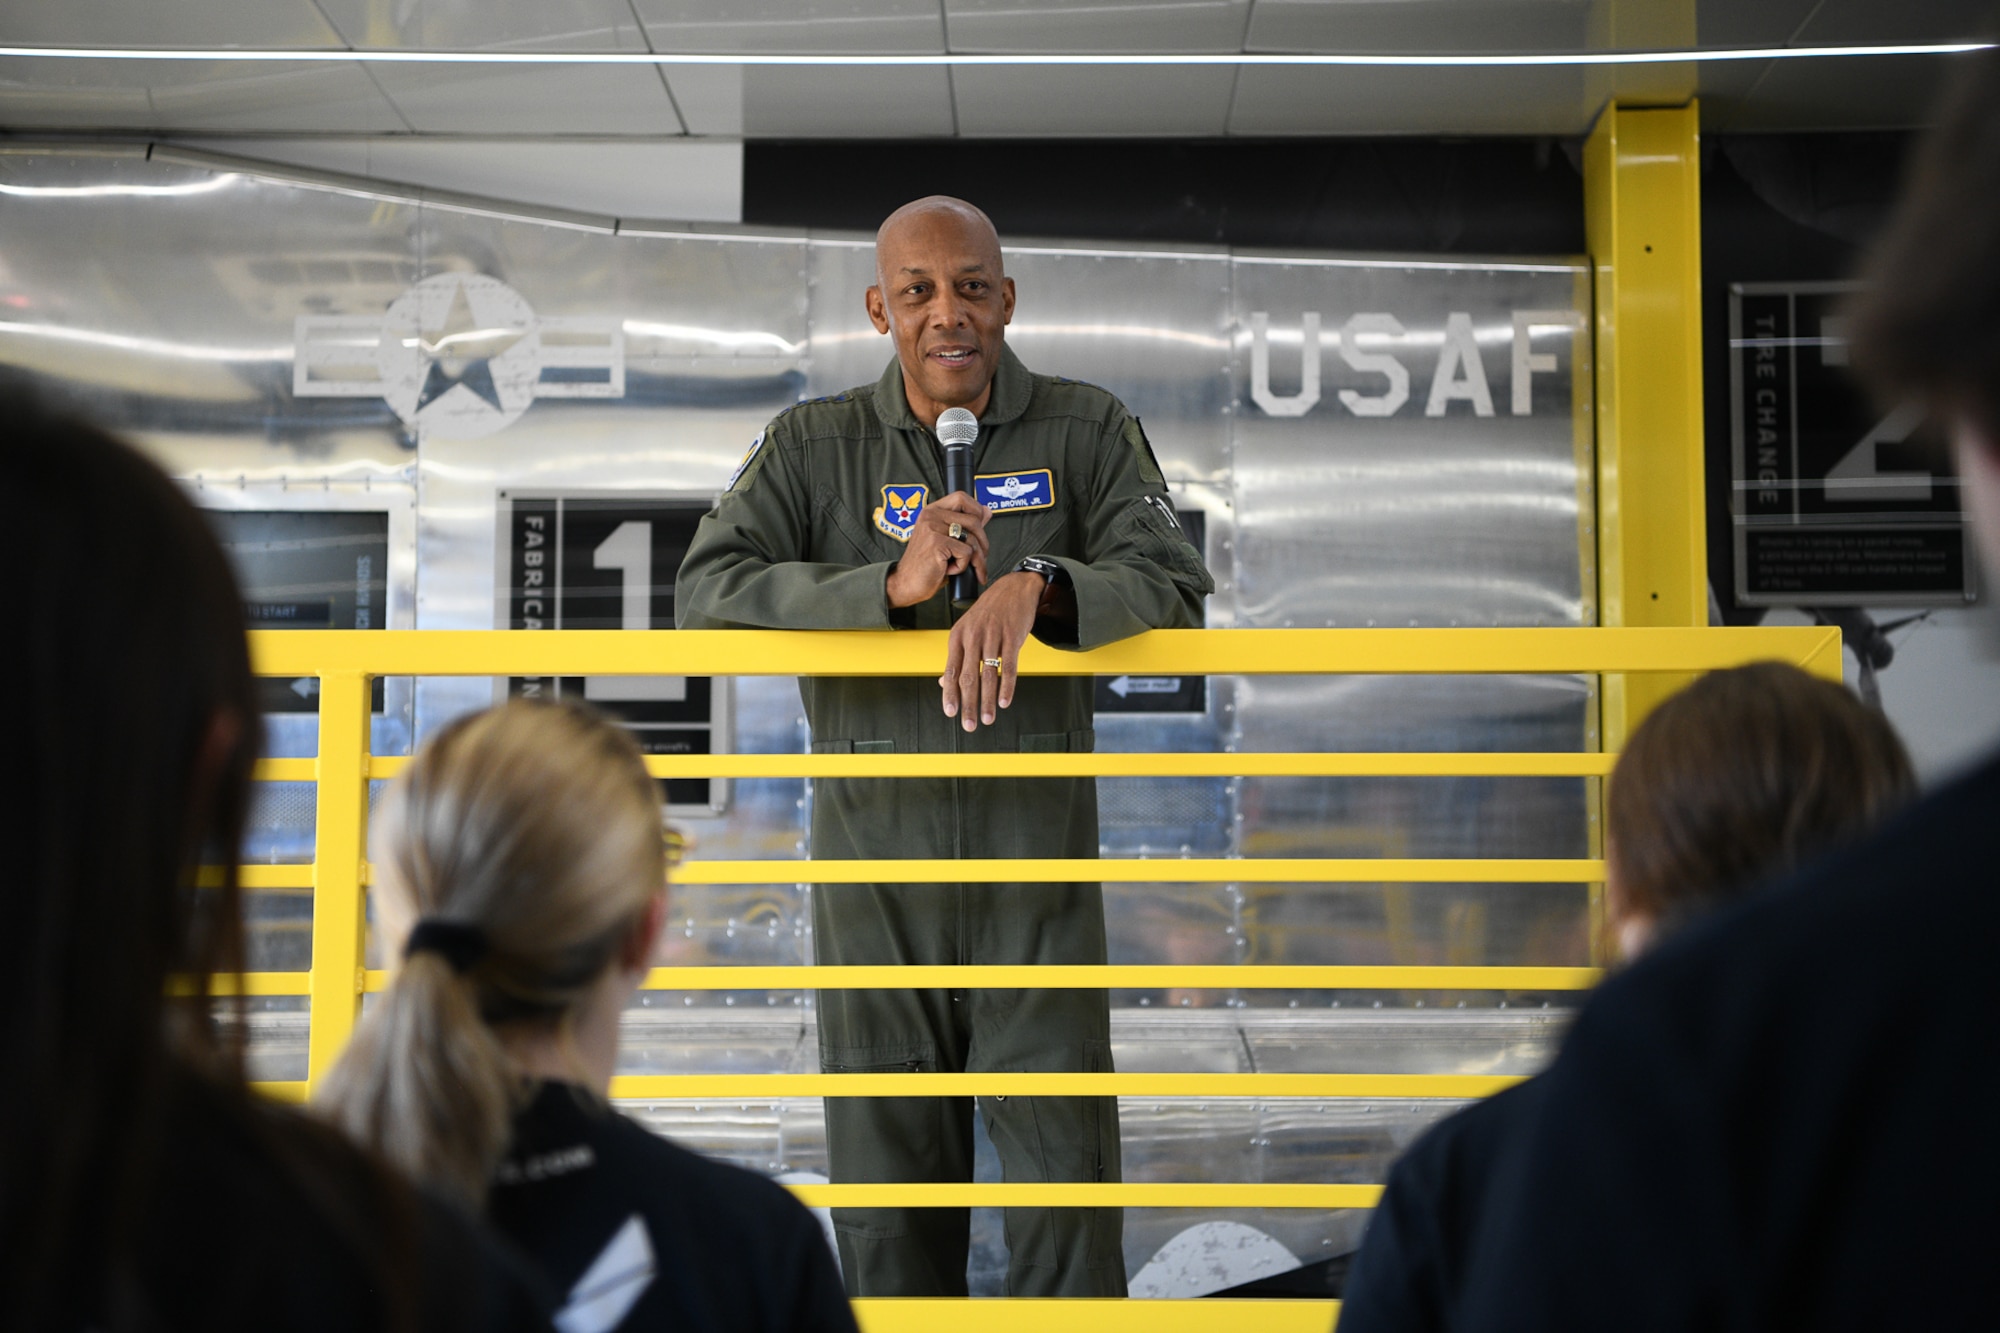 Air Force Chief of Staff Gen. CQ Brown, Jr., answers questions from future Airmen, members of the Delayed Entry Program, at a national recruiting asset called "The Hangar," at the Road America race course near Elkhart Lake, Wisconsin, July 3, 2022.